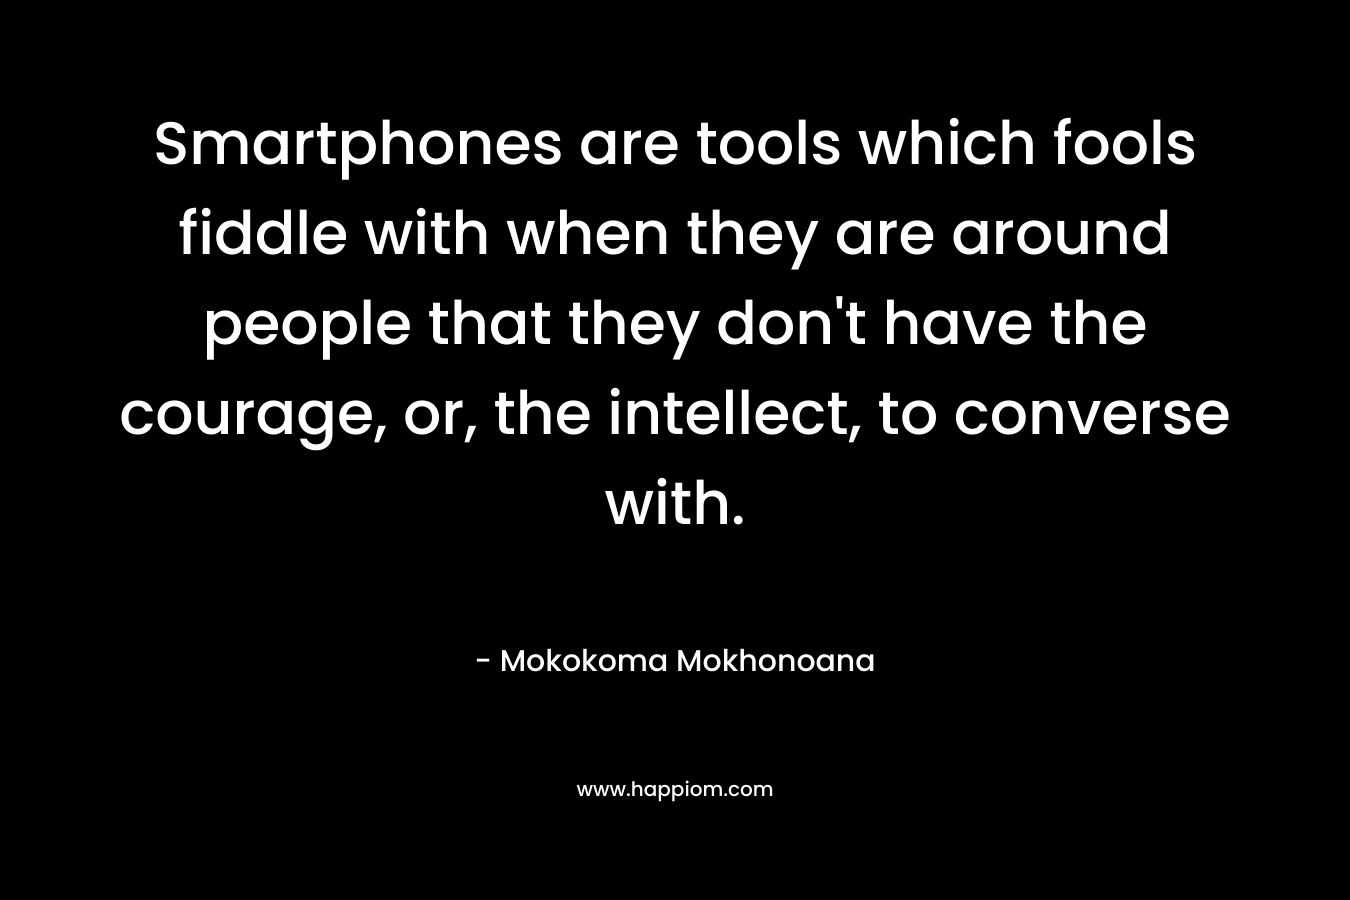 Smartphones are tools which fools fiddle with when they are around people that they don't have the courage, or, the intellect, to converse with.